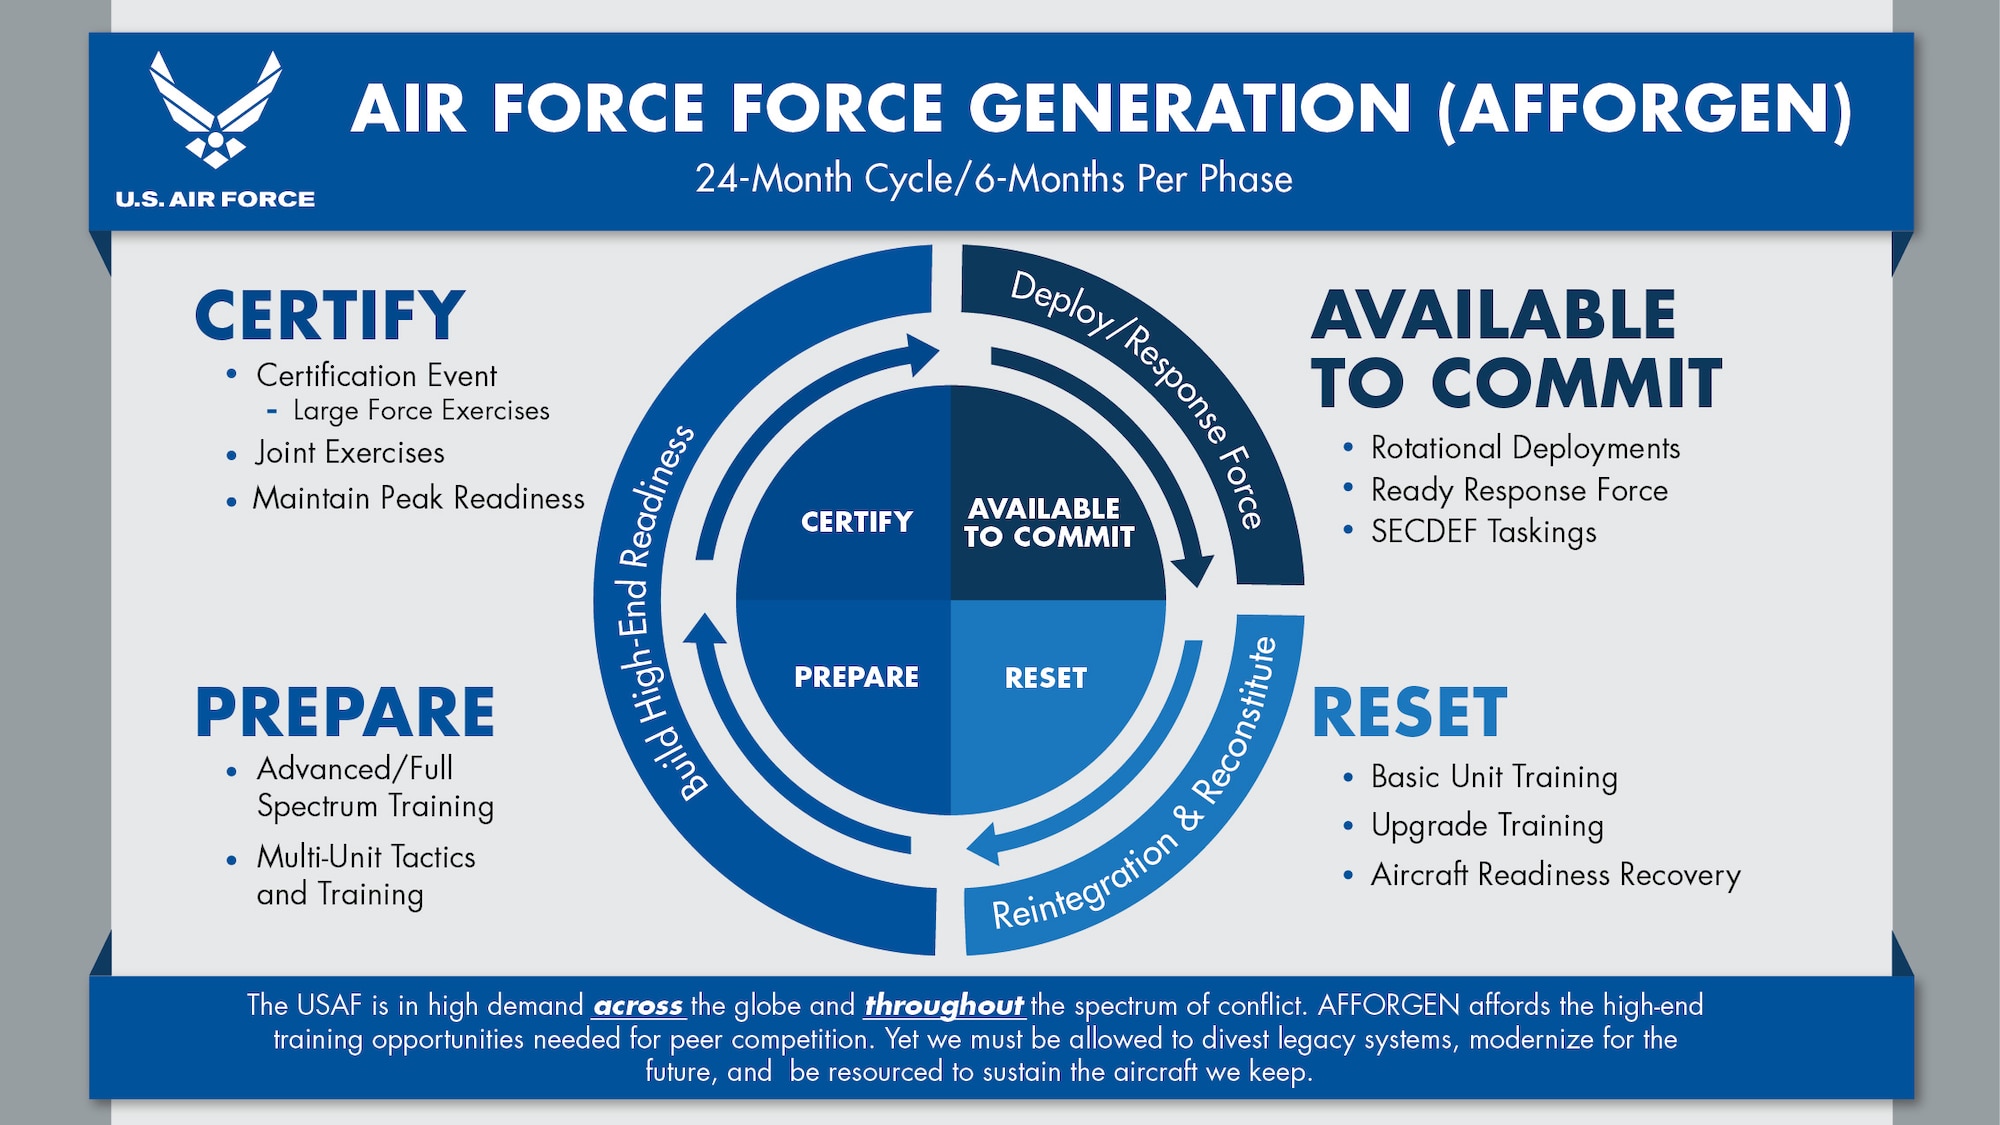 Big changes are underway for deployed Airmen as the U.S. Air Force transitions away from the expeditionary Air Force model of force presentation to the Air Force Force Generation model after more than 20 years of contingency operations.